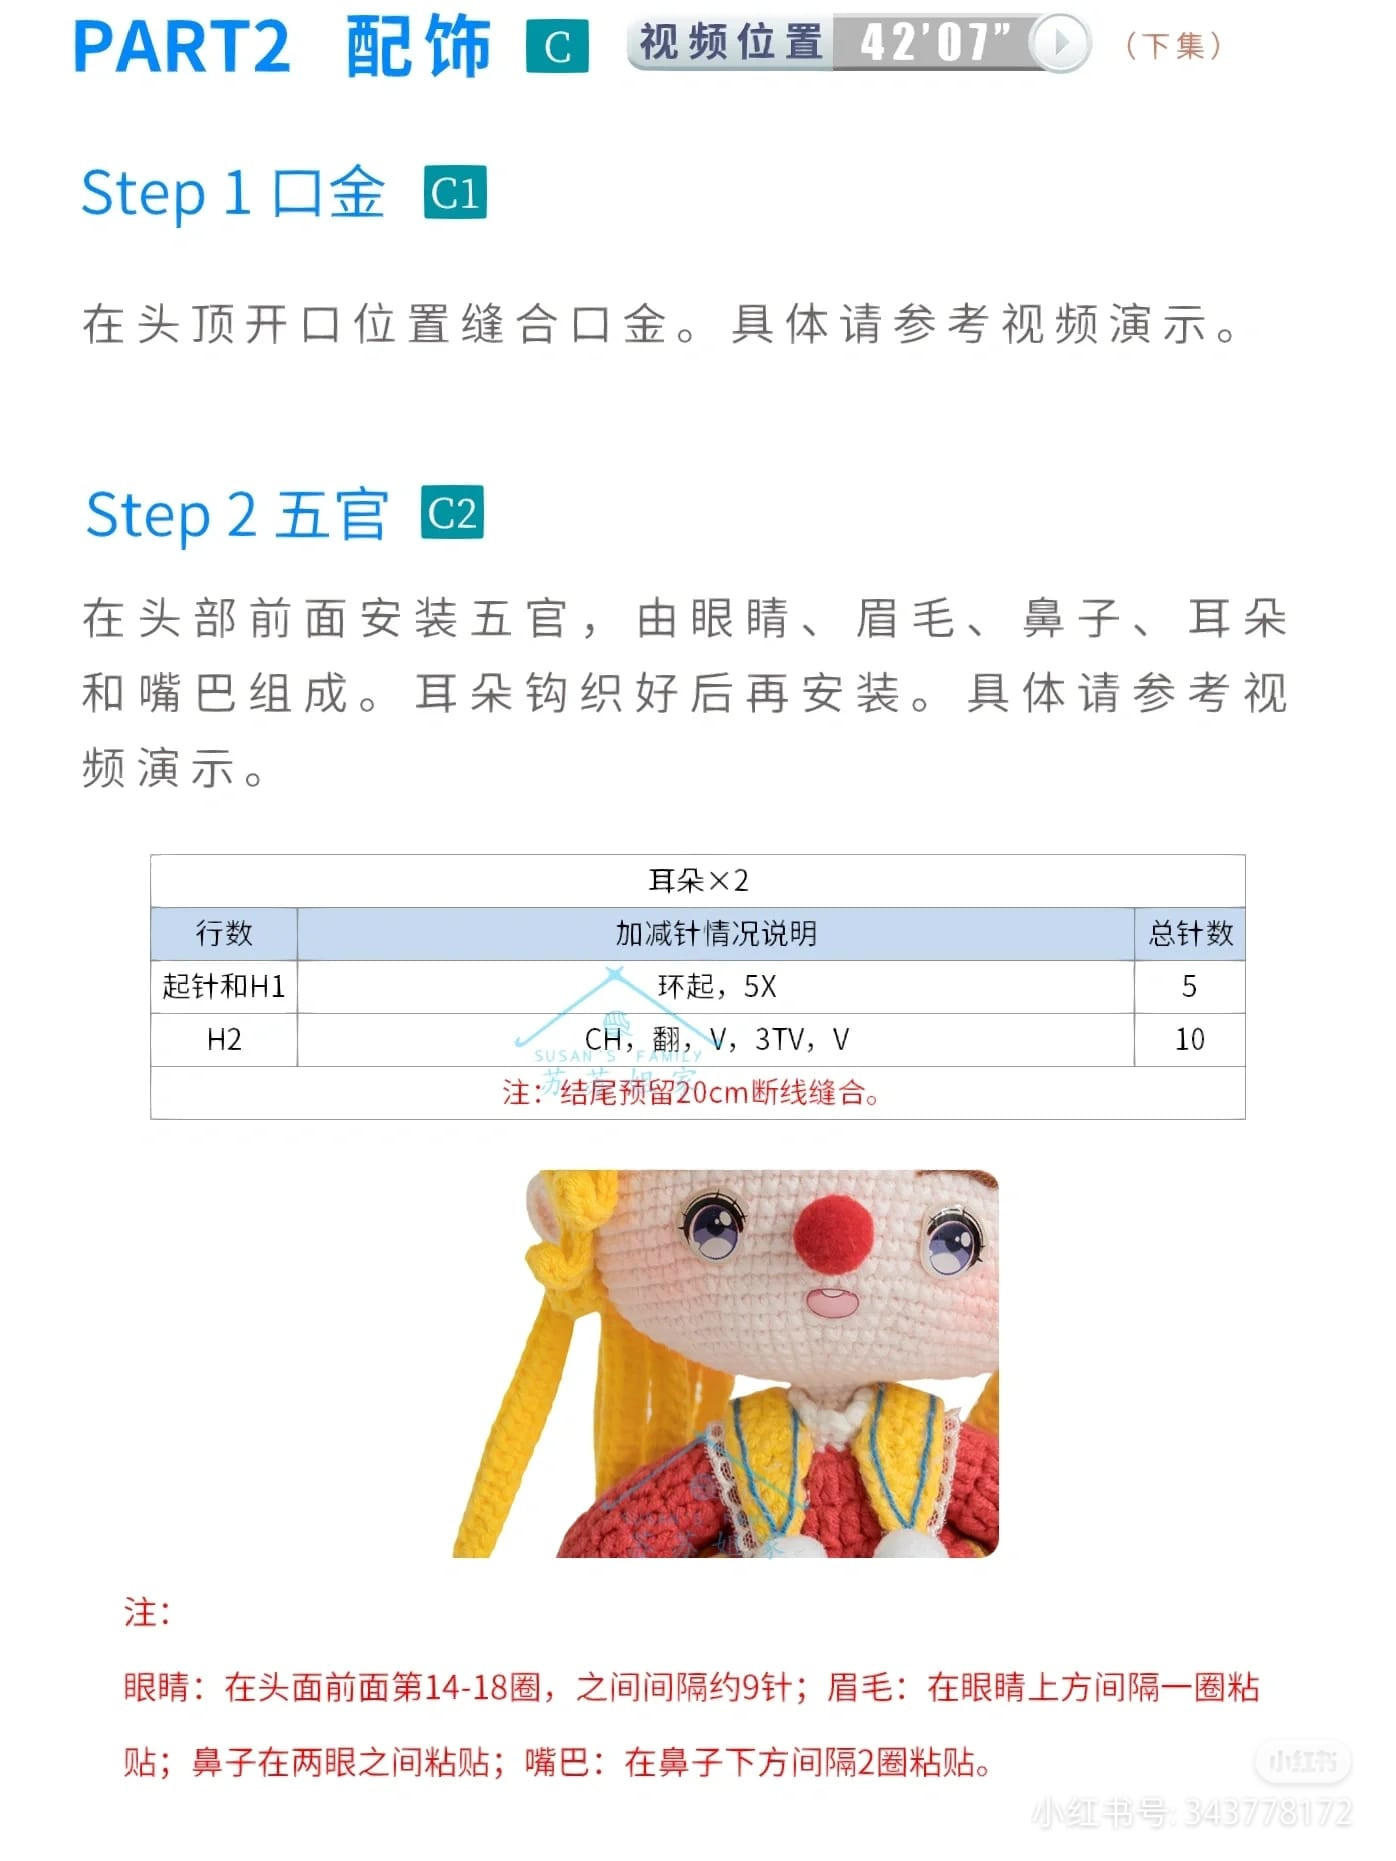 Knitting pattern in the shape of a doll with blonde hair, red shirt